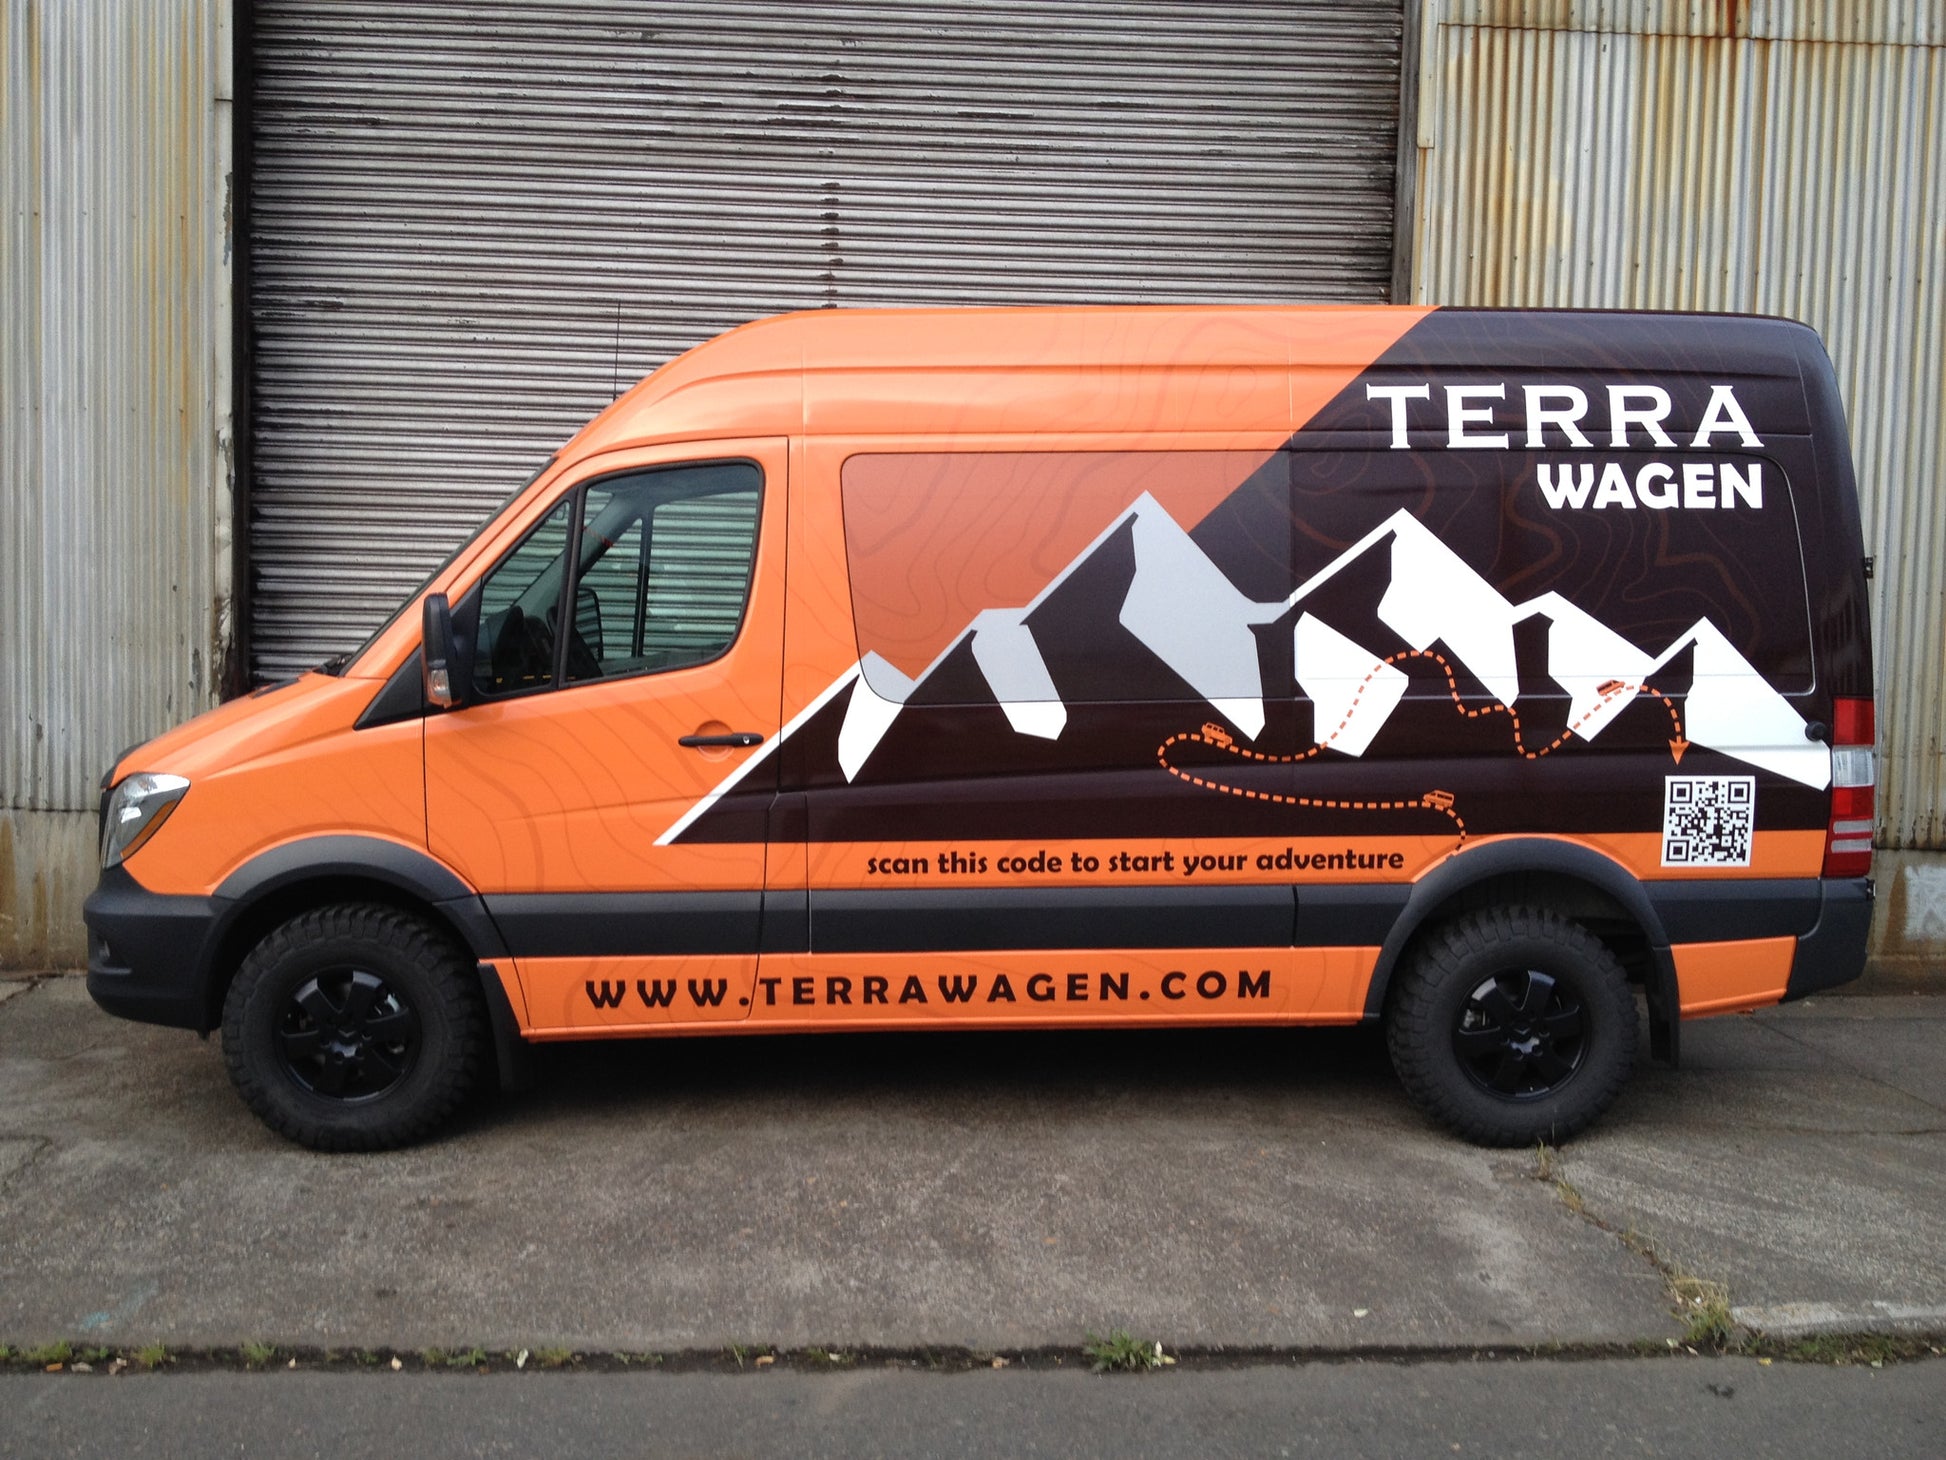 Terrawagen products, protect your investment.